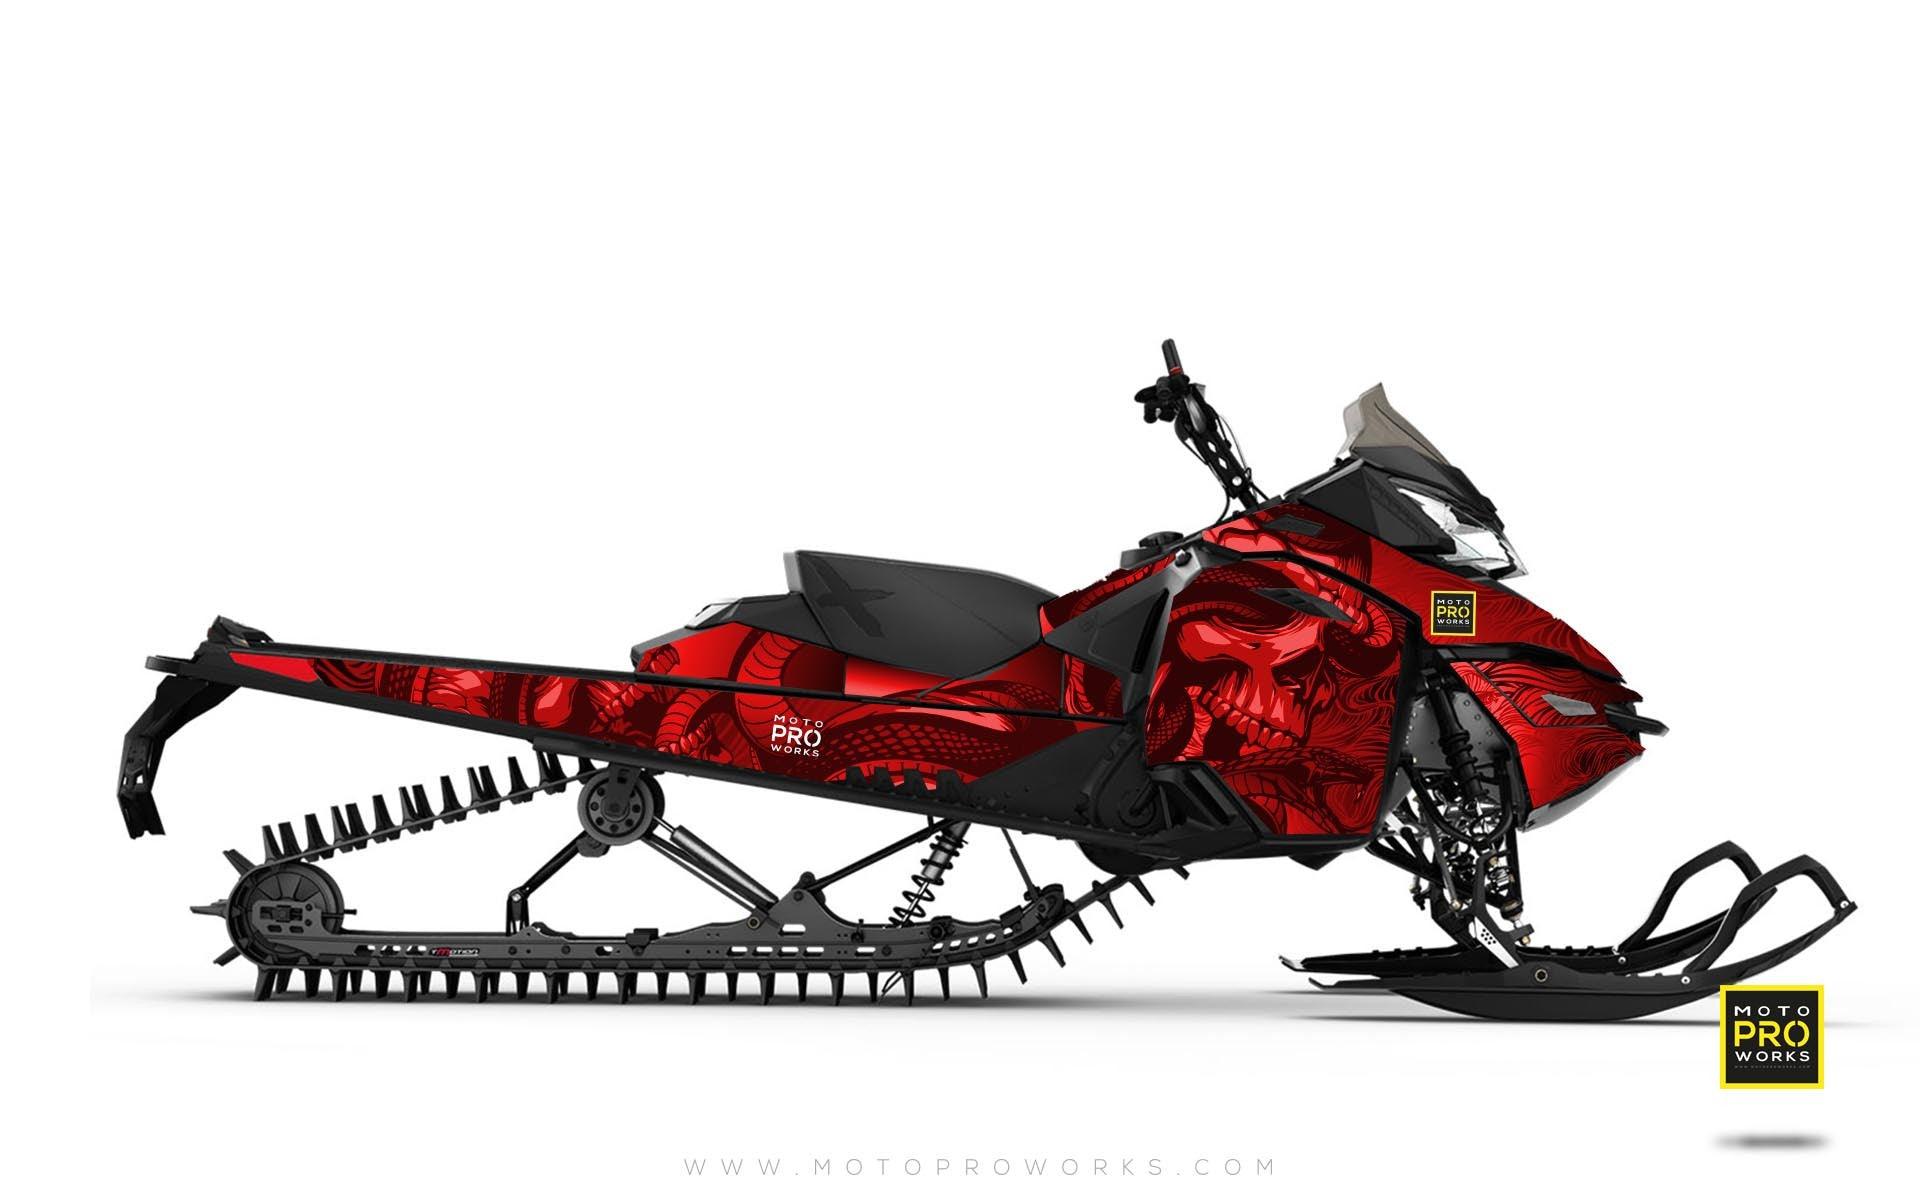 Ski-Doo Graphics - "Ssskully" (red) - MotoProWorks | Decals and Bike Graphic kit